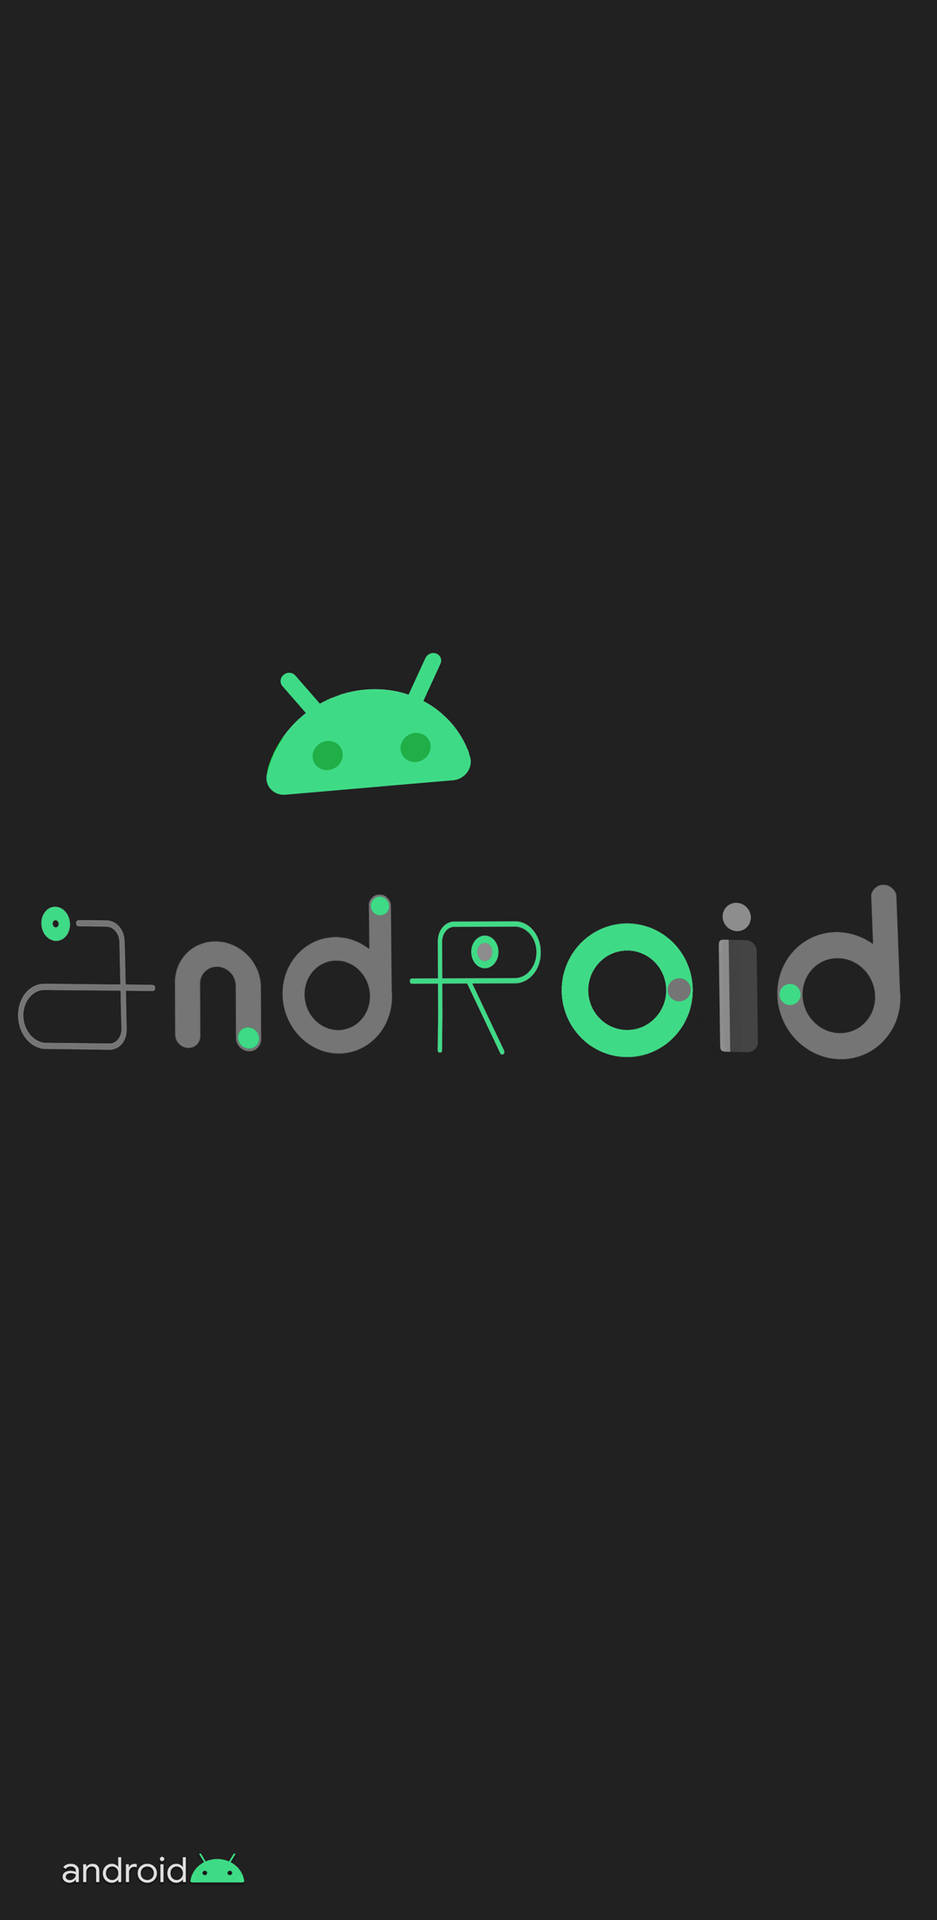 Android Logo On A Black Background Background